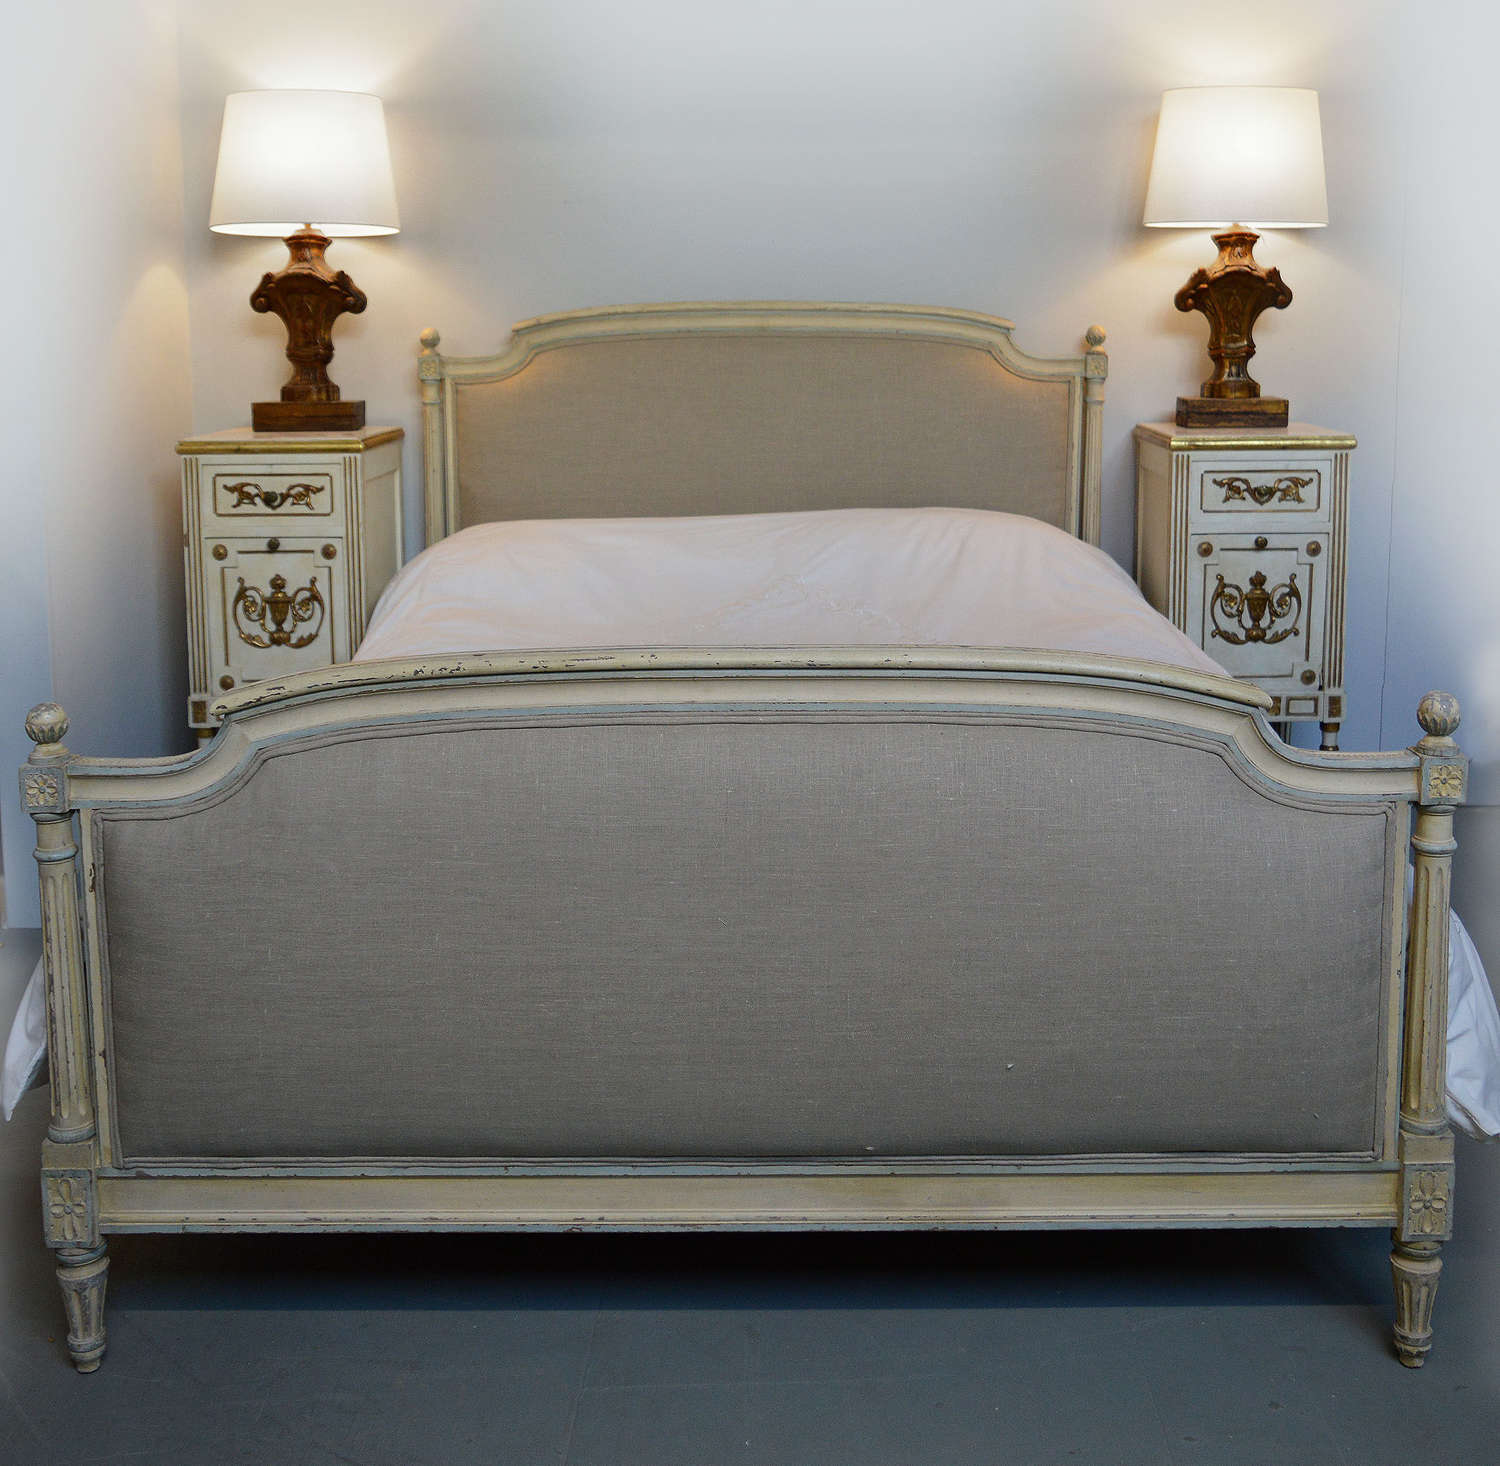 Louis XVI style upholstered double bedstead